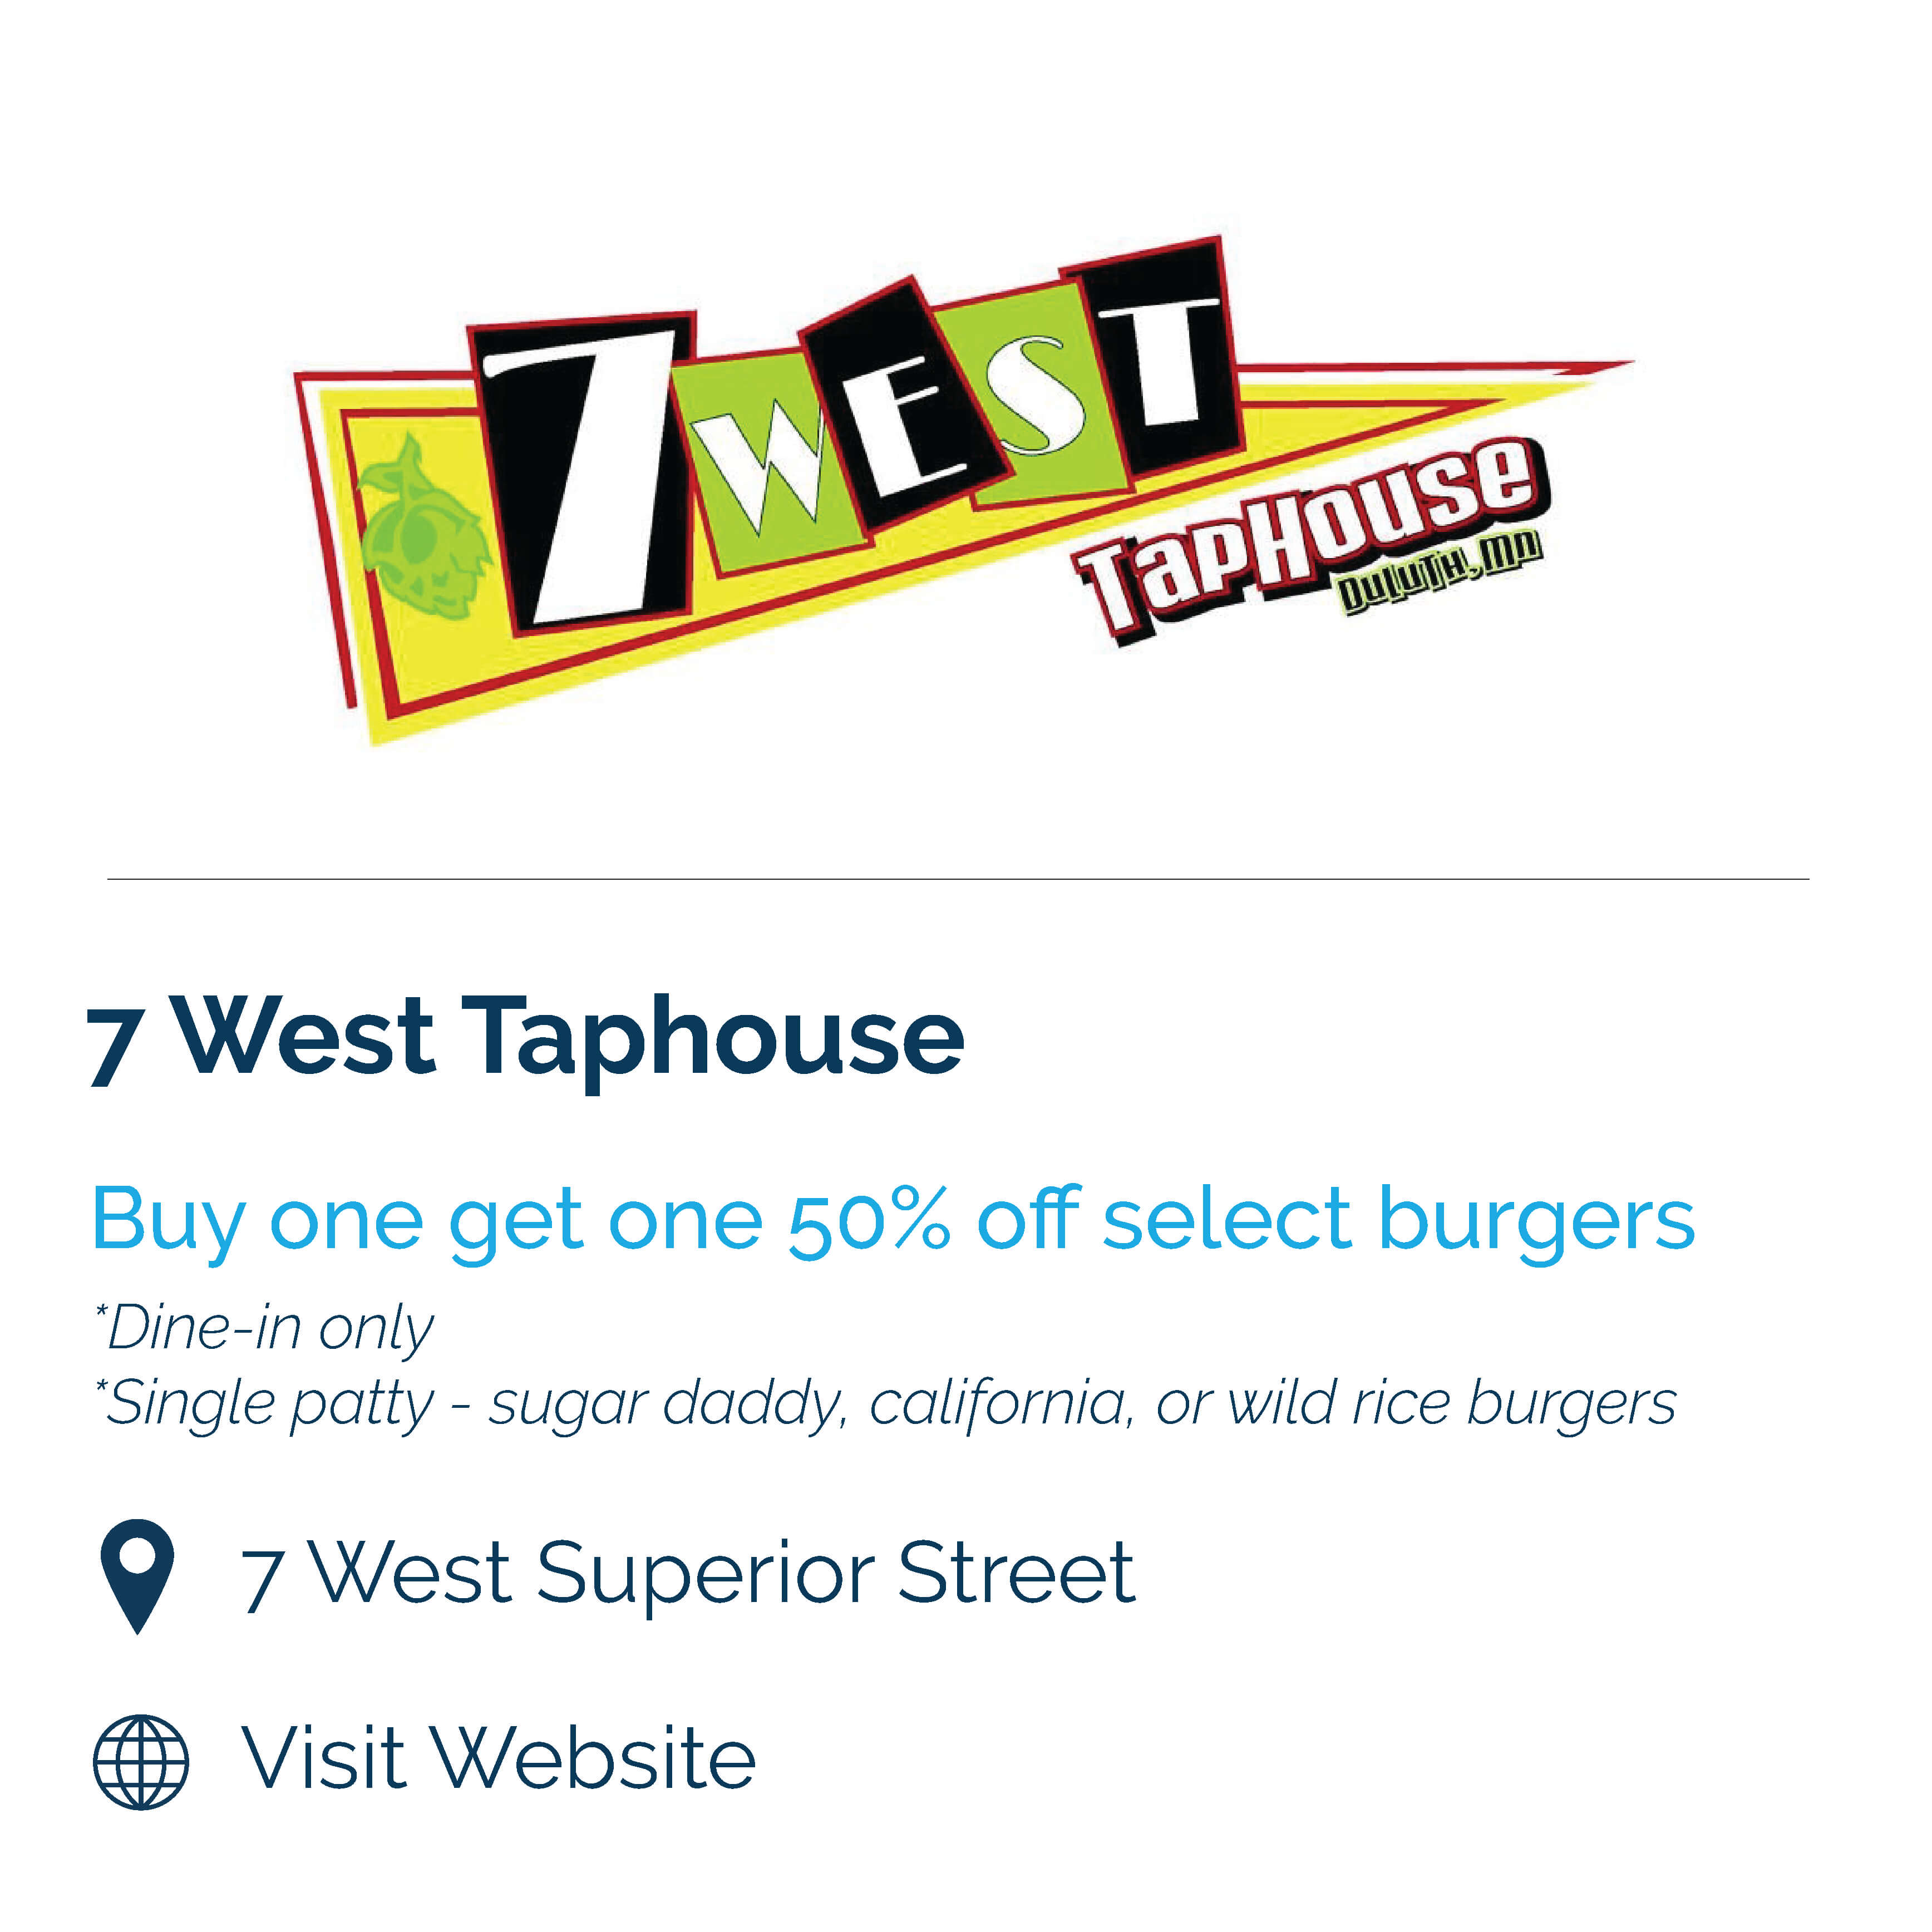 7 west taphouse. buy one get one 50% off select burgers. dine in one. single patty, sugar daddy, california, and wild rice burgers. 7 west superior street.